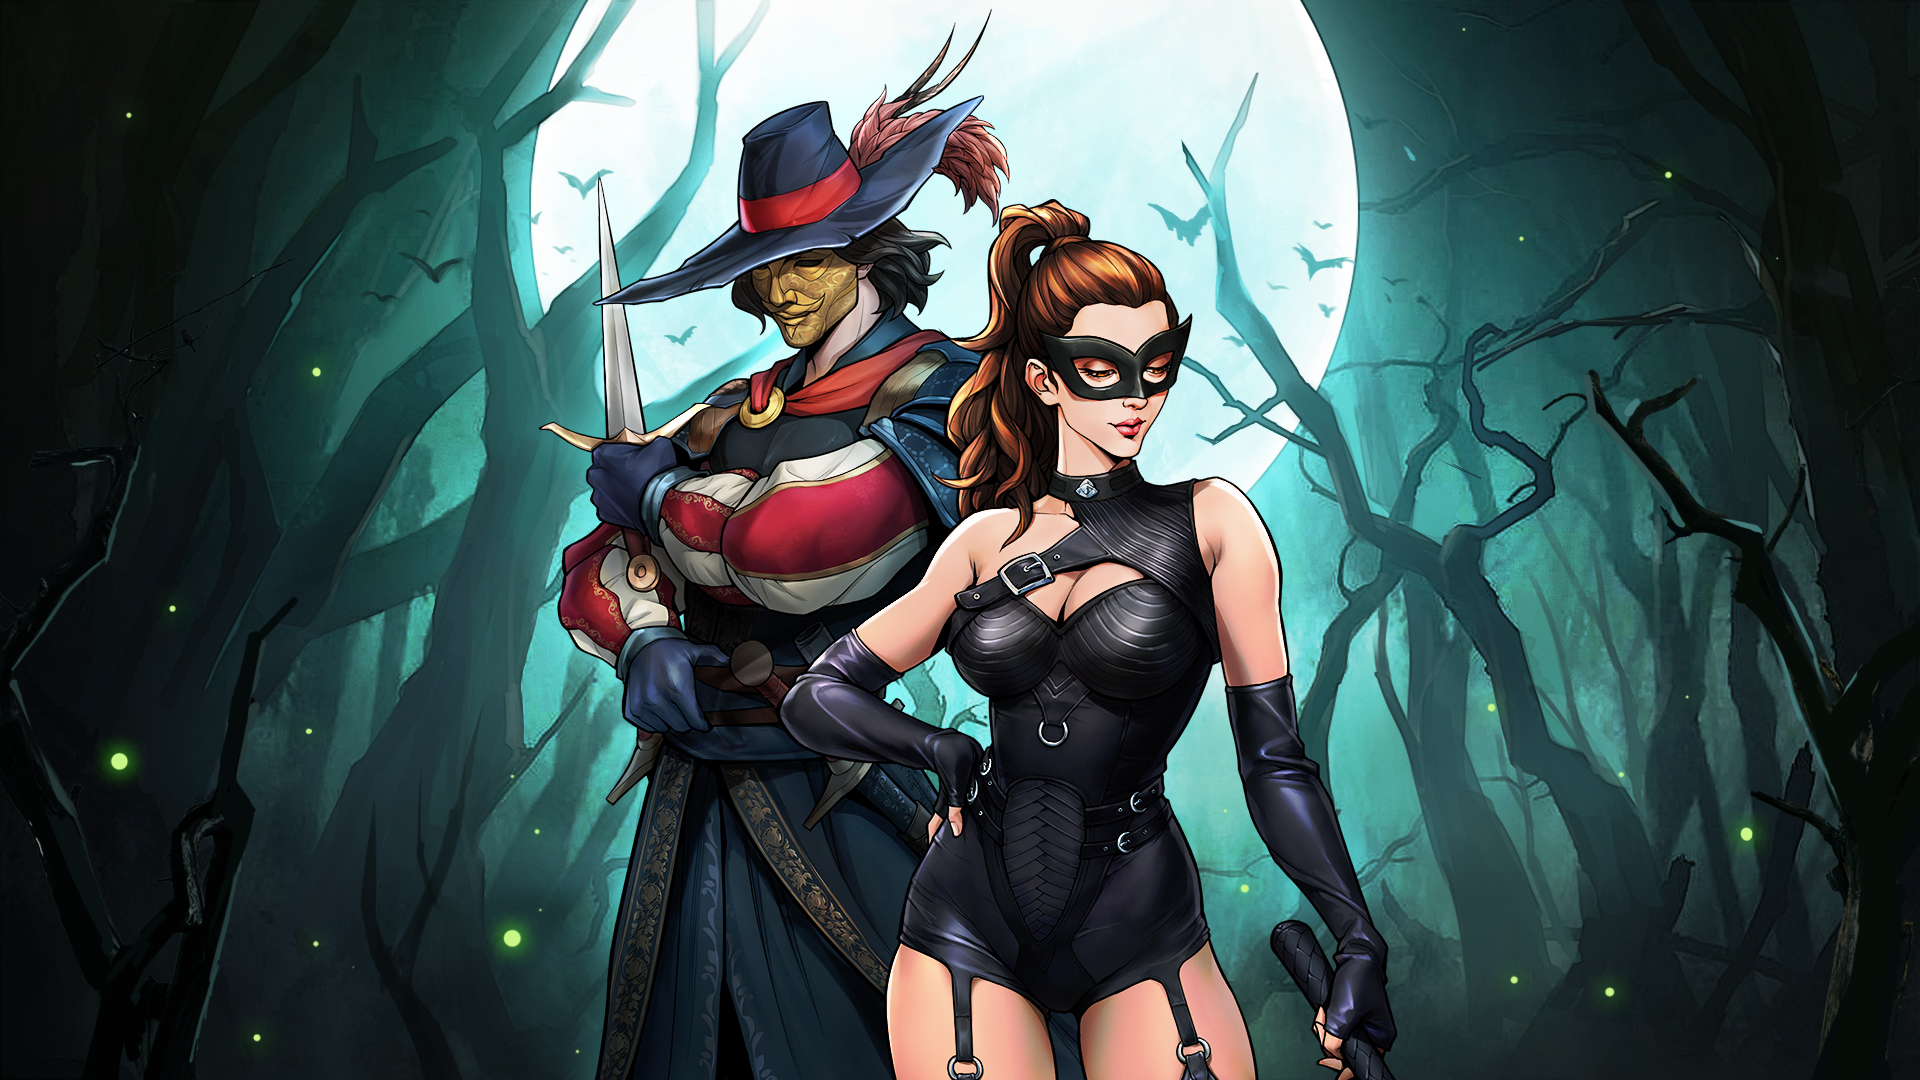 Gangs of the Shires, Fight for Justice
In the Gangs of the Shires event,the limited hero Fawkes and maiden Evey, who were very popular in Thanksgiving last year, are back! Simultaneously, the Bloody M